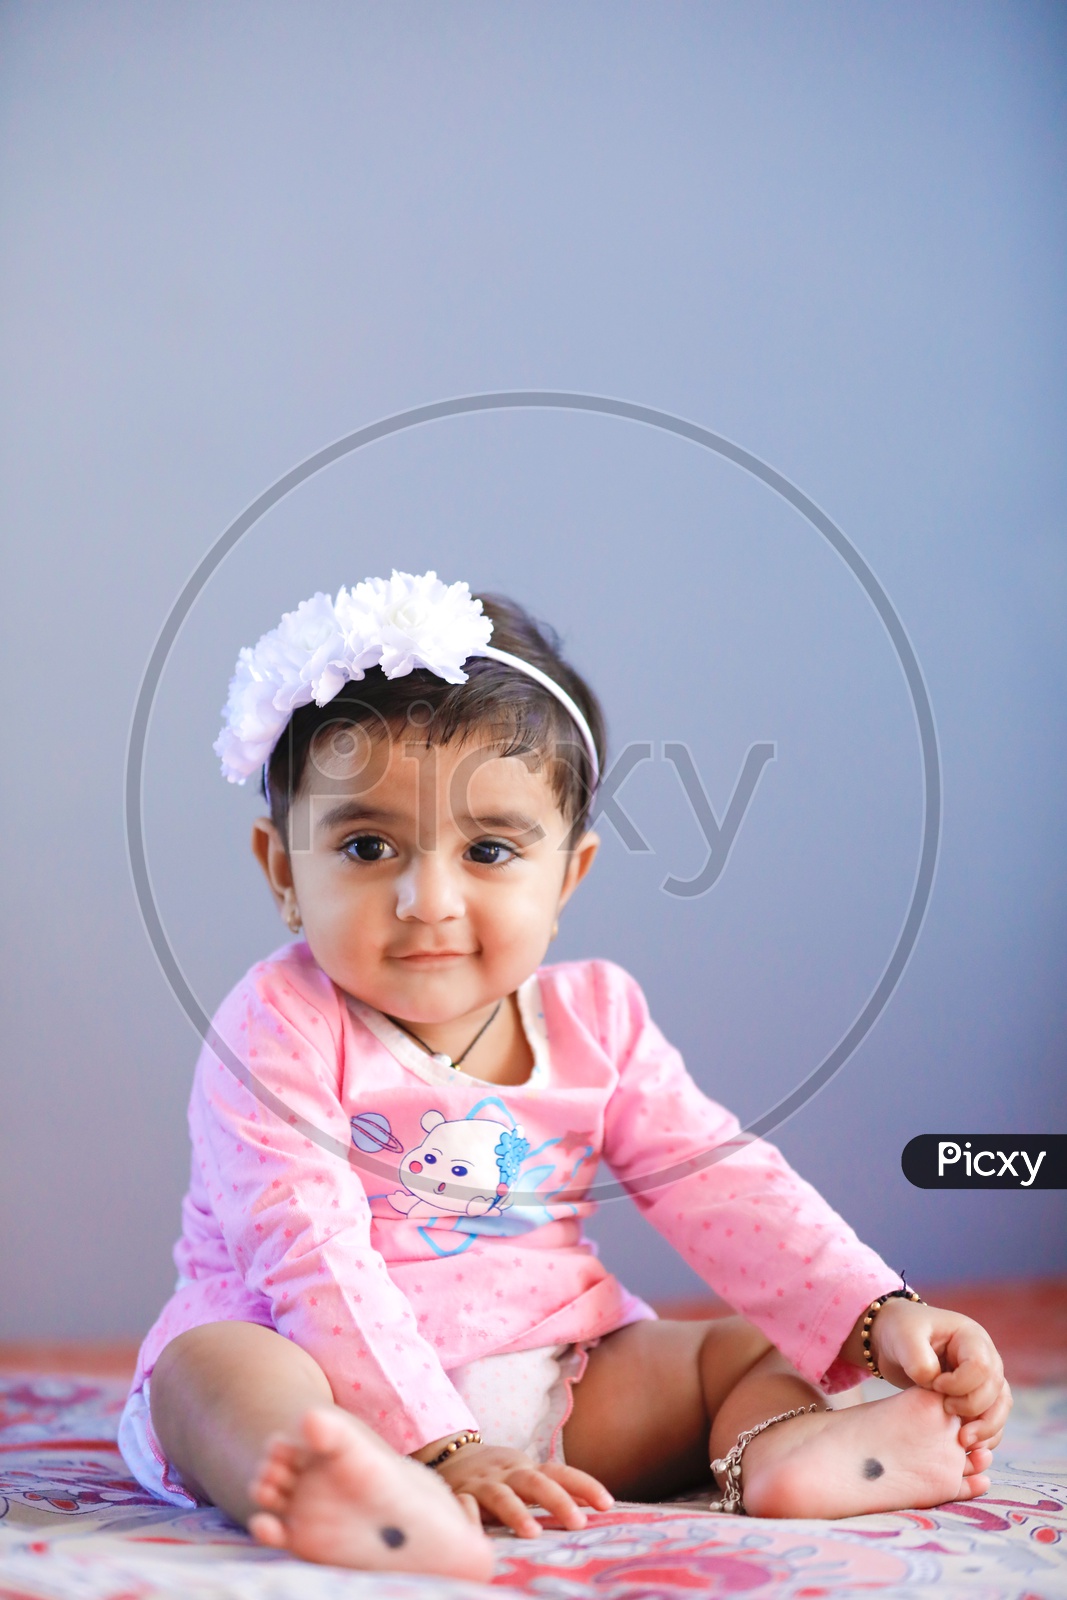 Cute Indian Baby Girl With Cute Expression On Face